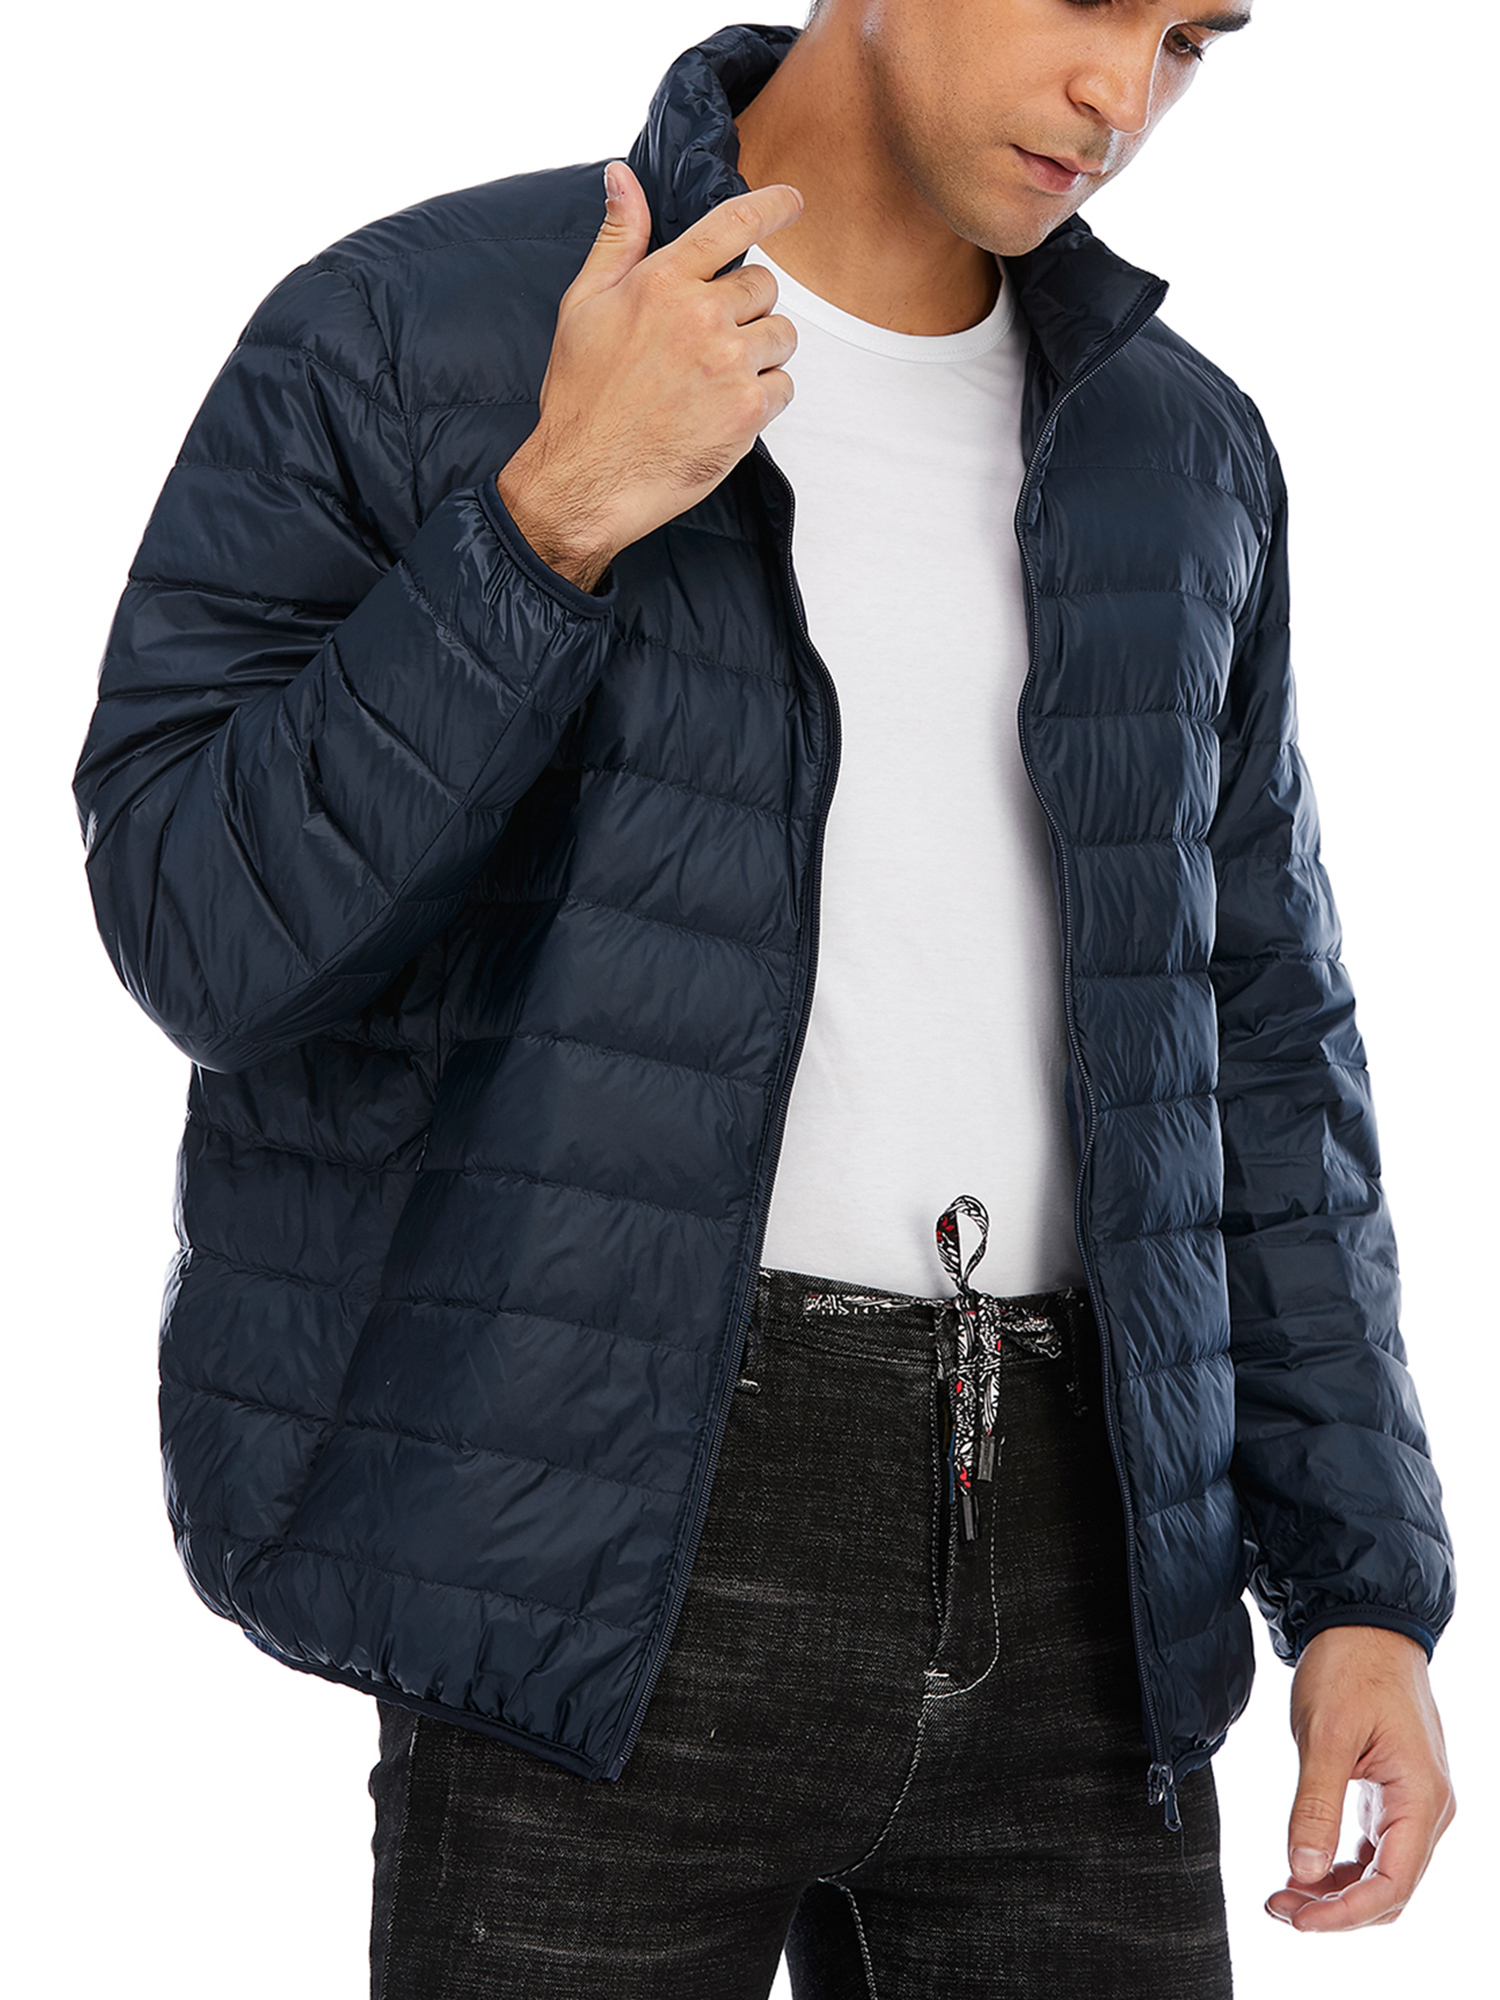 SAYFUT Men's Lightweight Down Jacket Puffer Bubble Coat Packable Warm Puffer Down Zipper Coat Water Resistant  Big and Tall Size S-2XL - image 1 of 8